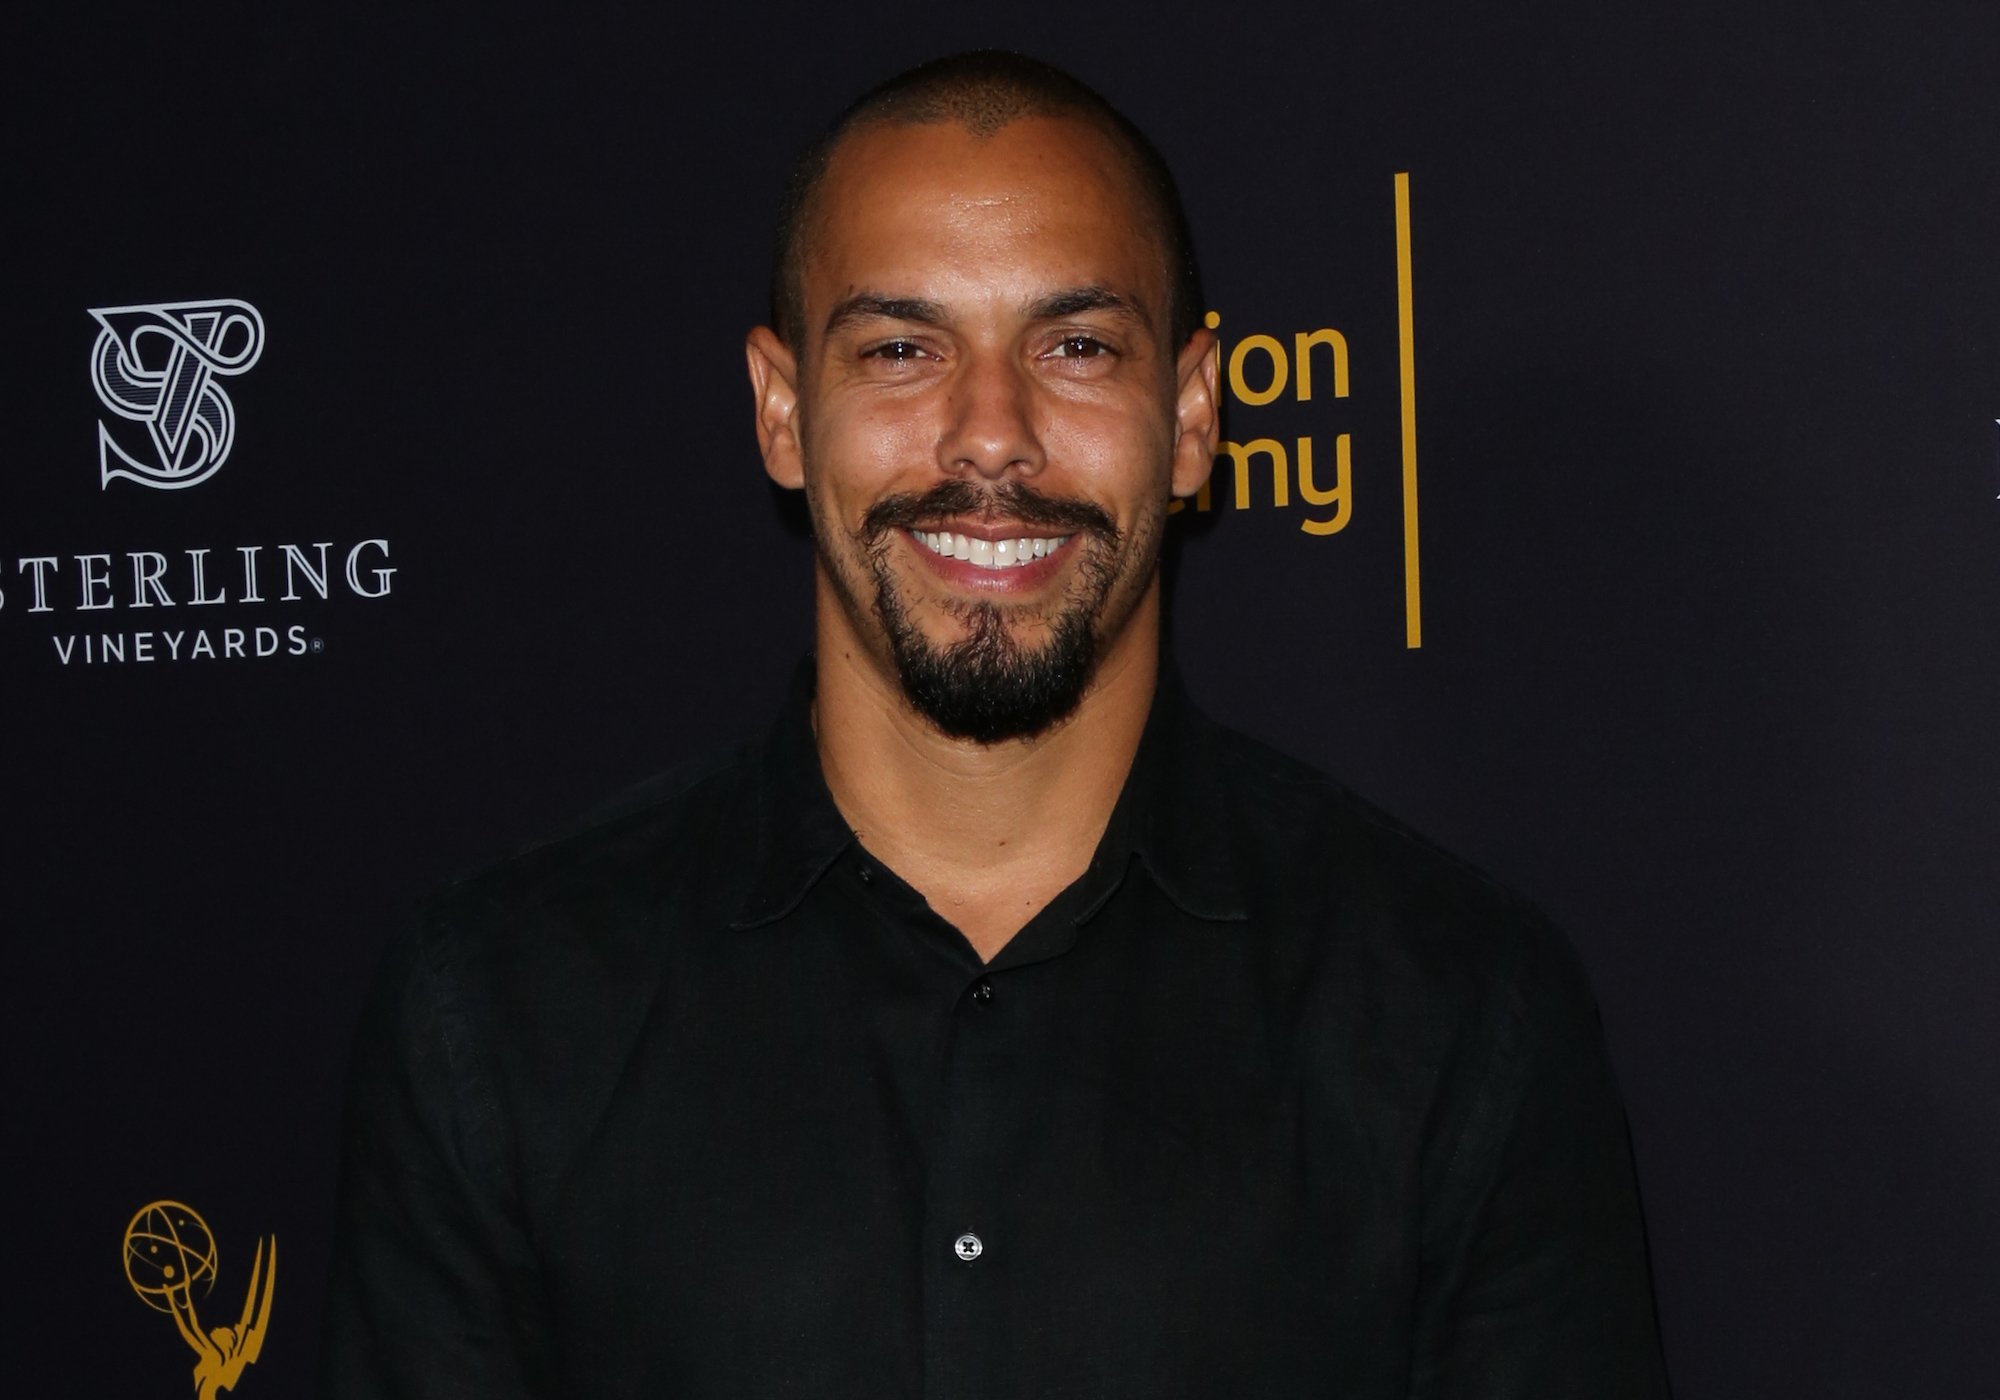 What Is ‘The Young and the Restless’ Actor Bryton James’ Real Name?